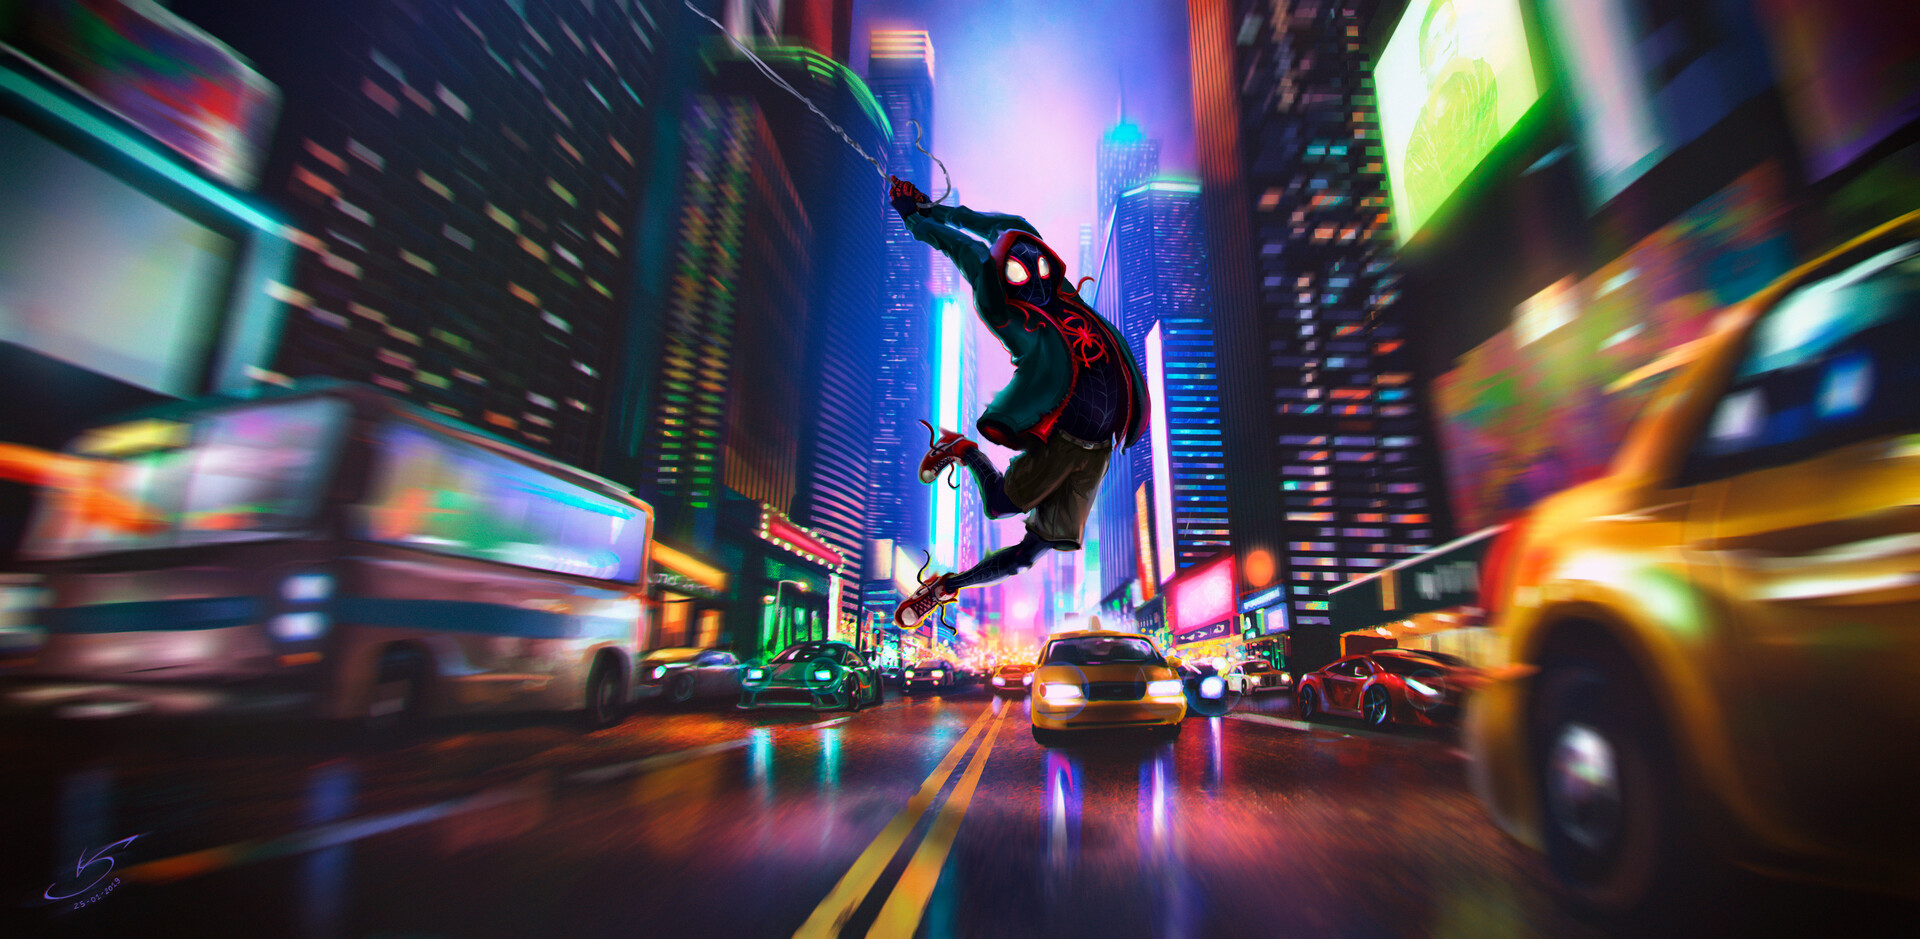 General 1920x939 Spider-Man: Into the Spider-Verse Spider-Man Miles Morales city taxi buses street New York City comics Sony artwork